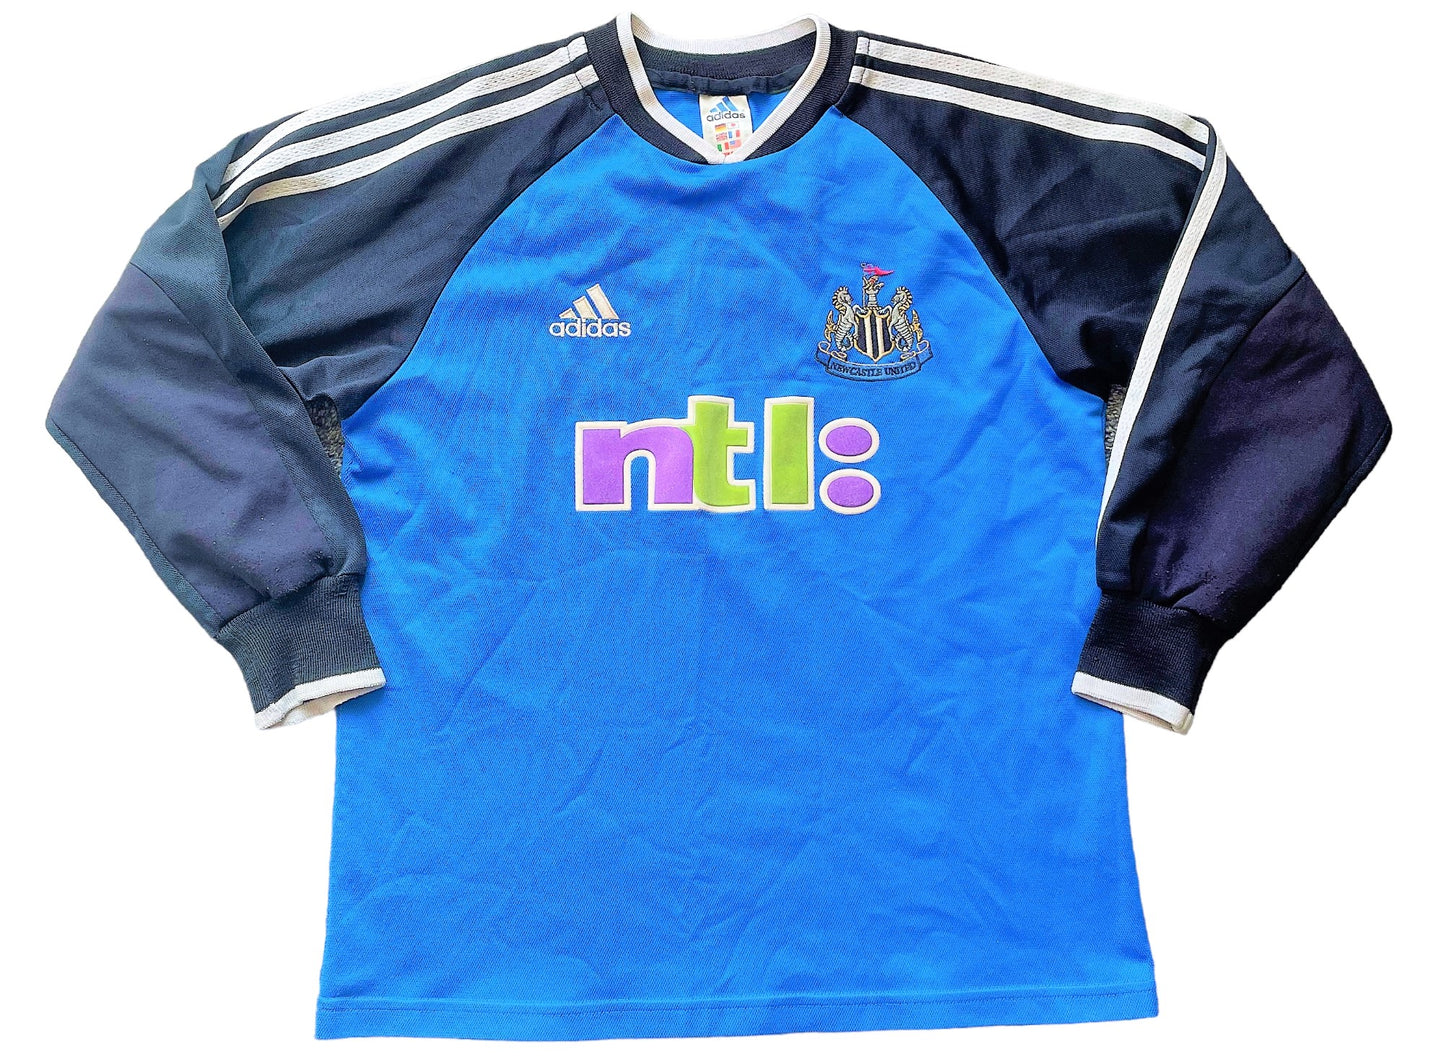 Newcastle Goalkeeper Shirt 2000 (very good) Adults Small/Youths